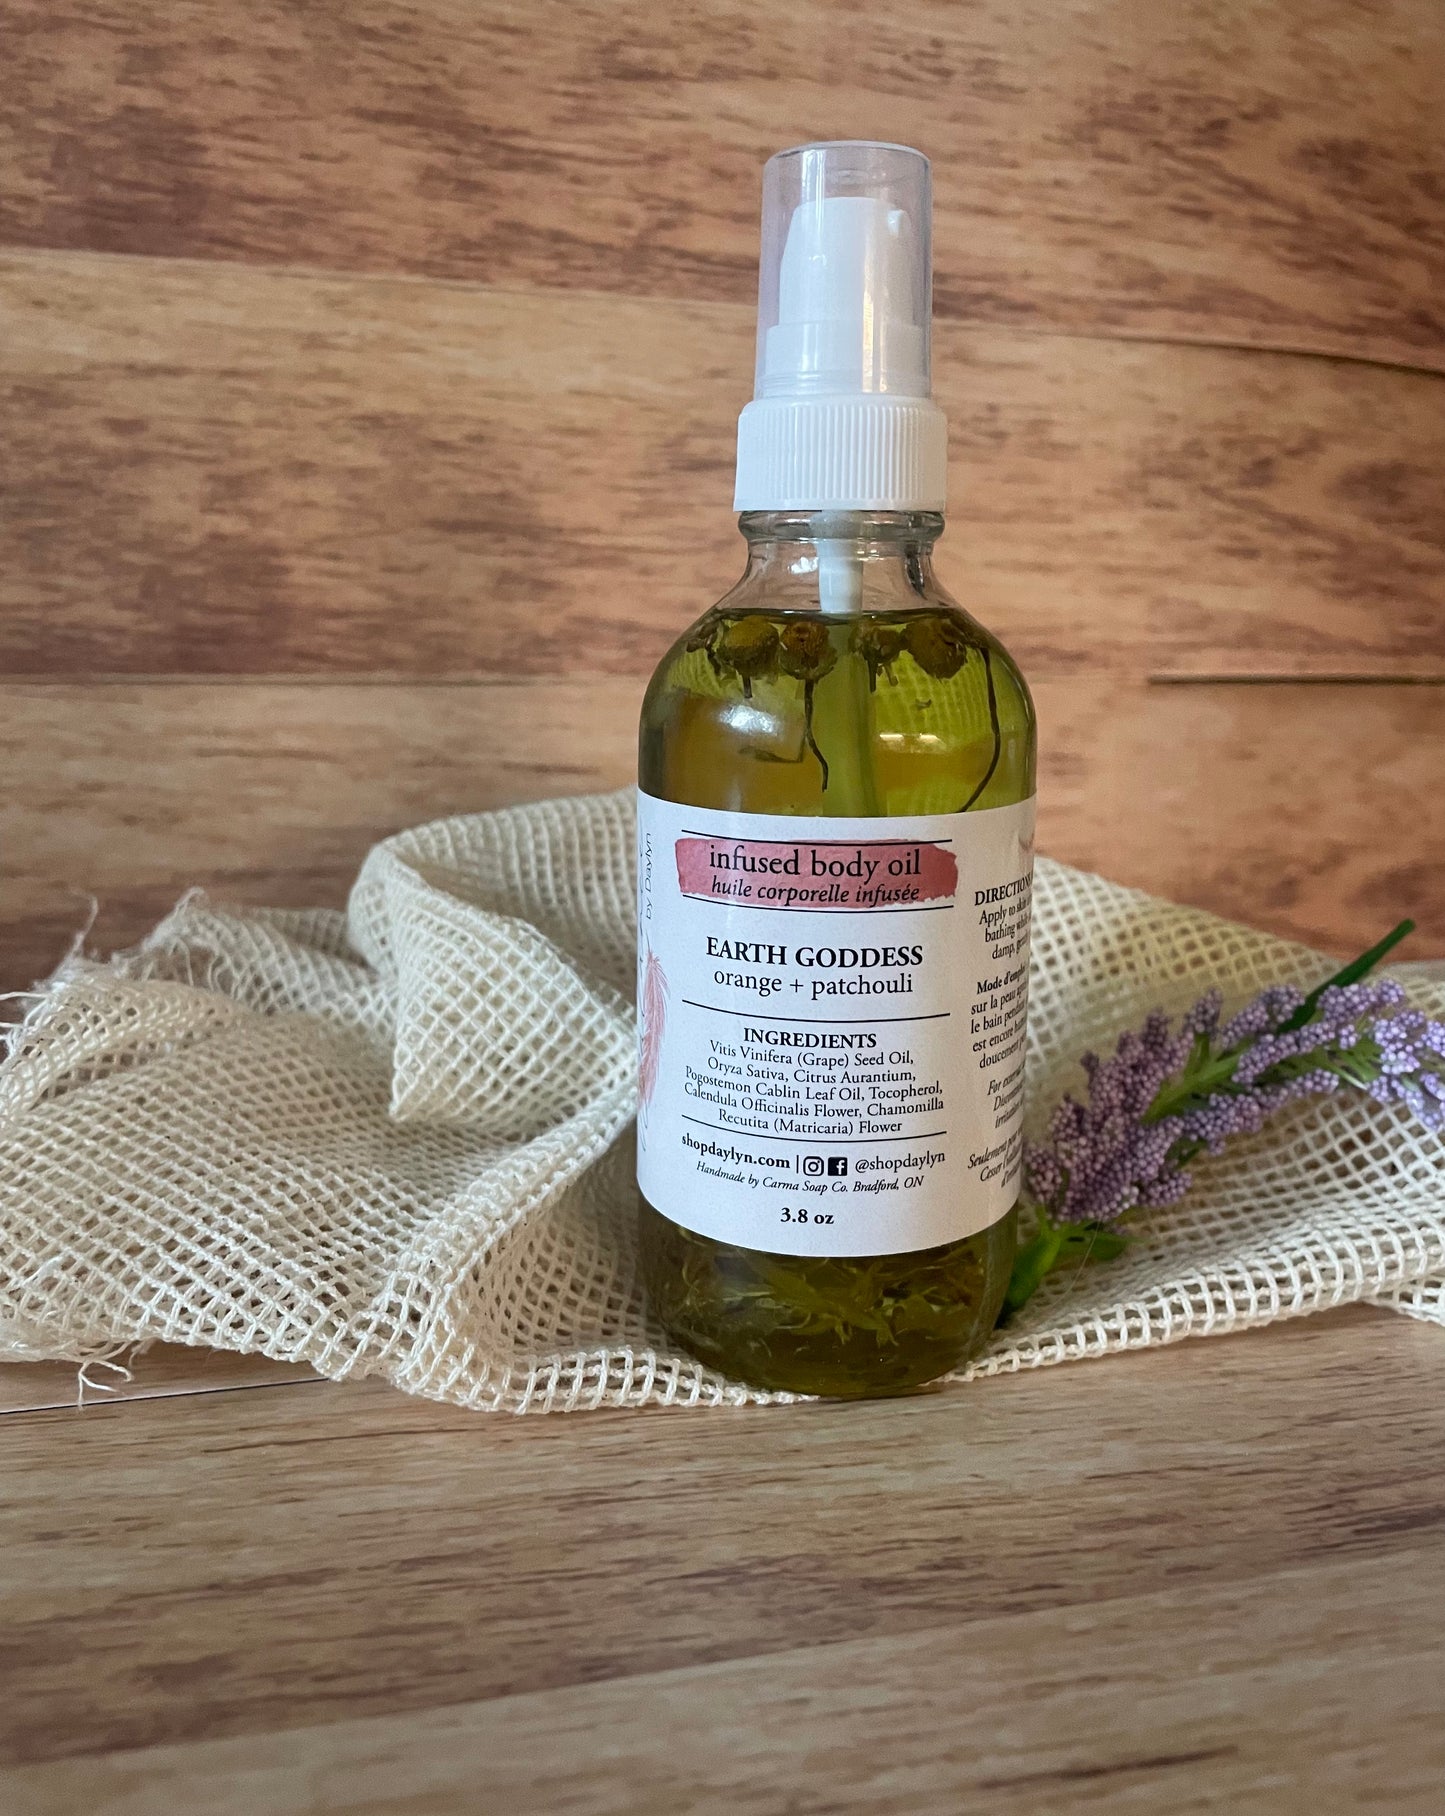 Awaken the earth goddess in you by trying out our infused body oil, naturally sourced, locally crafted and sold in newmarket, shop online or in store.